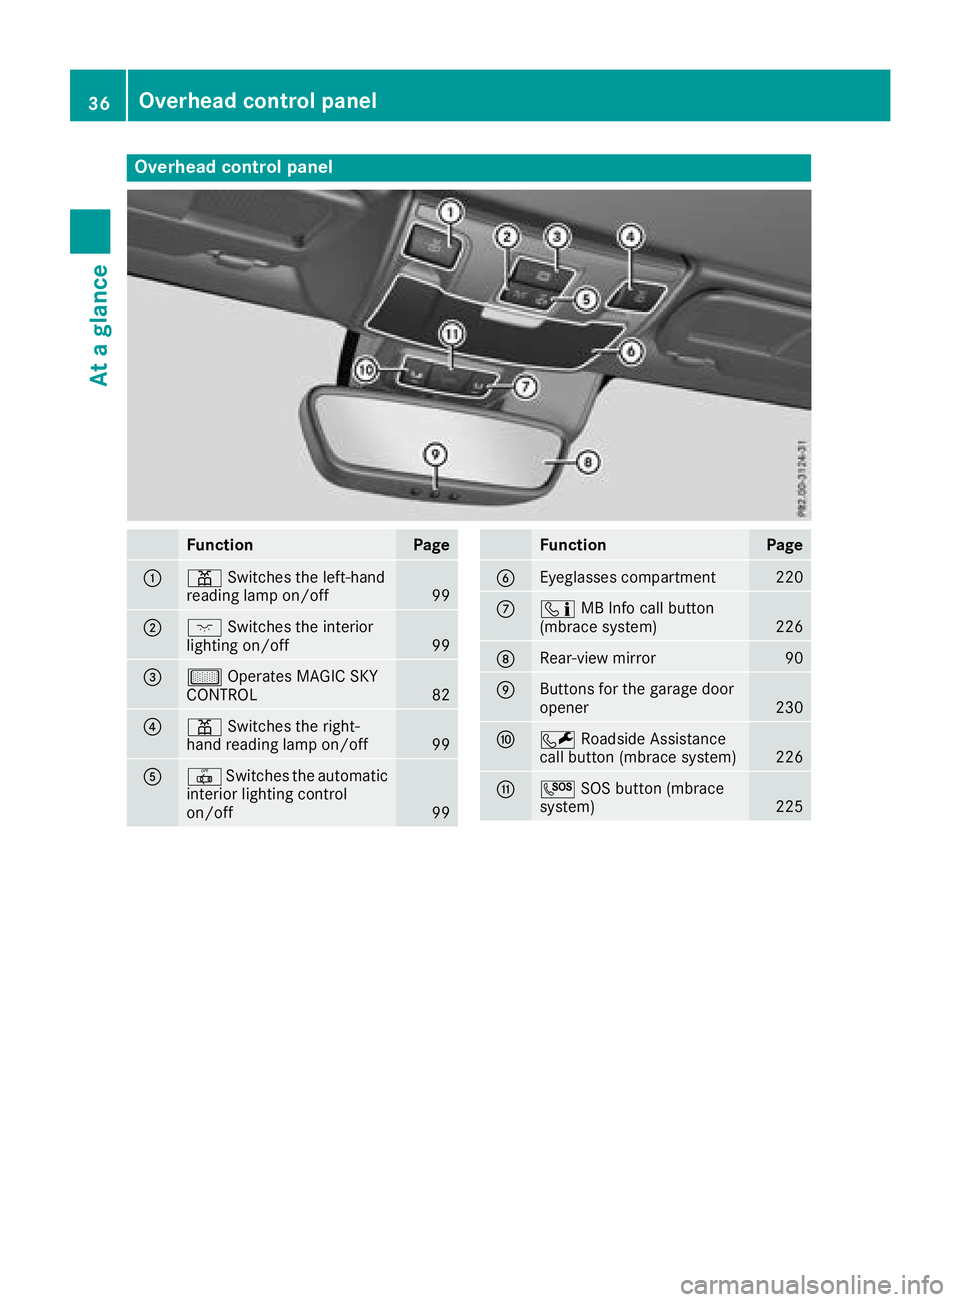 MERCEDES-BENZ SLC ROADSTER 2018 Owners Guide Overheadcontrol panel
FunctionPage
:p Switches the left-hand
reading lamp on/off99
;c Switches the interior
lighting on/off99
=µ Operates MAGIC SKY
CONTROL82
?p Switches the right-
hand reading lamp 